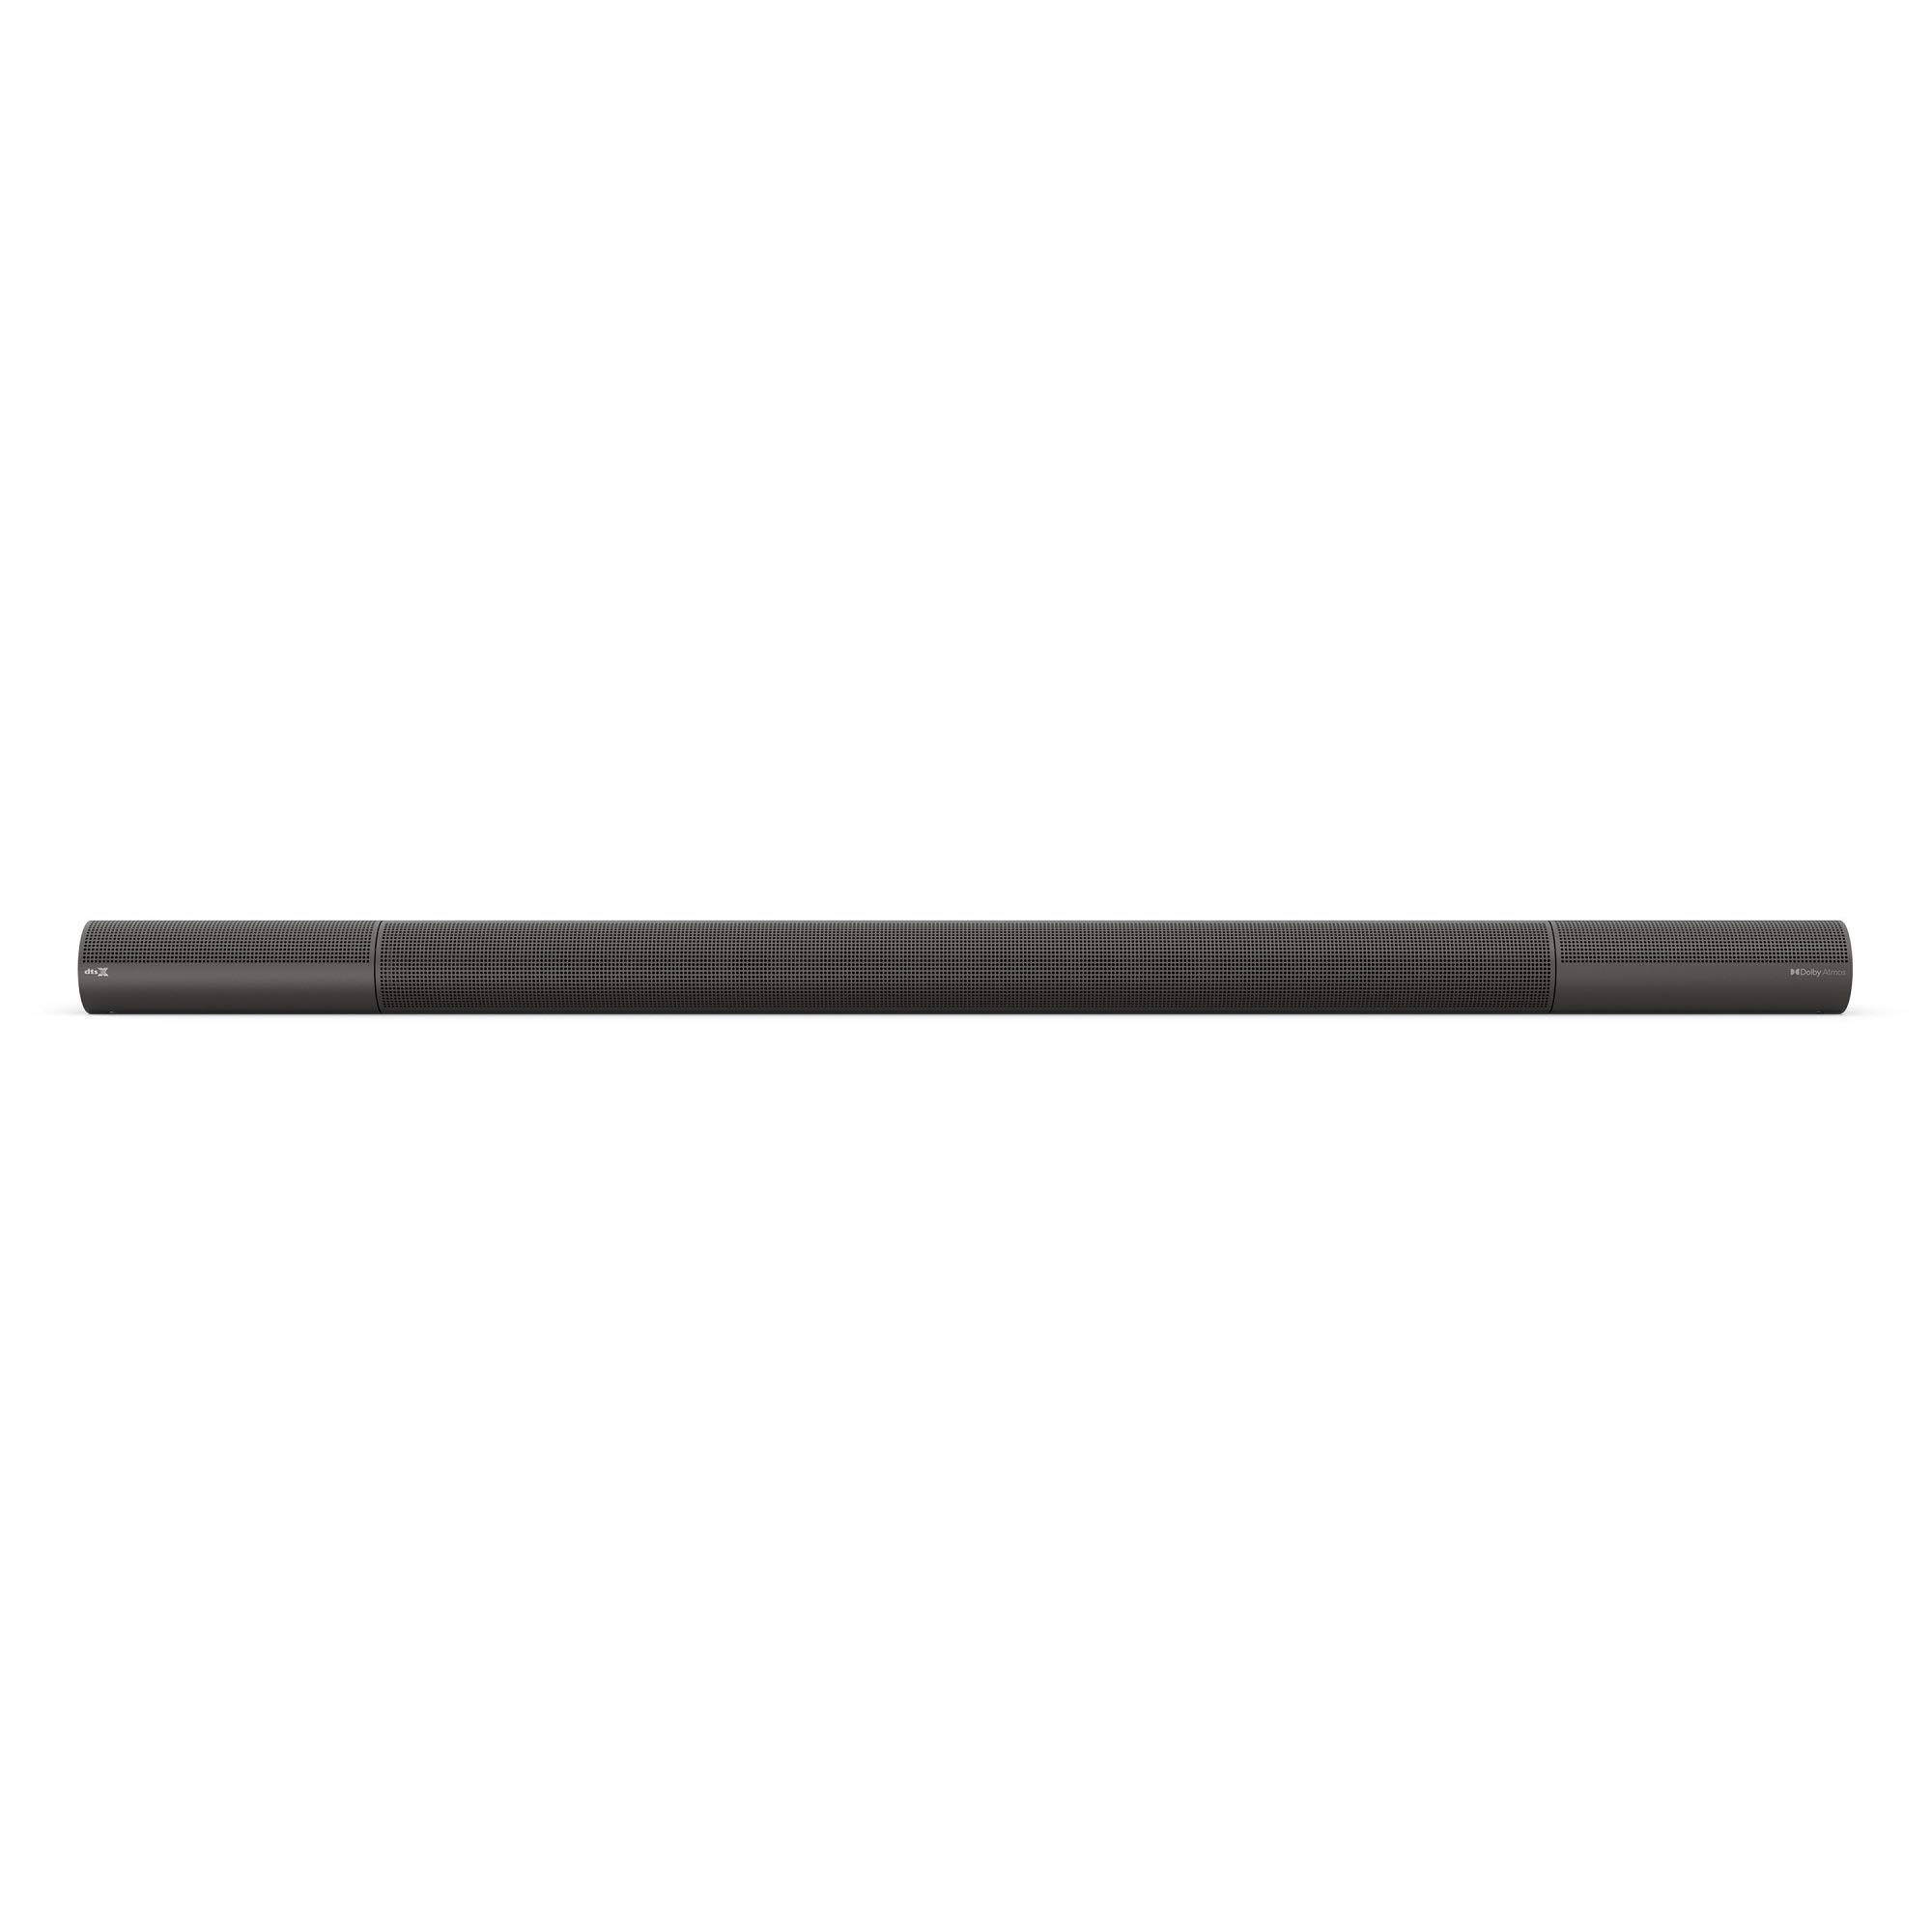 VIZIO Elevate Sound Bar for TV, Home Theater Surround Sound System for TV with Subwoofer and Bluetooth, P514a-H6 5.1.4